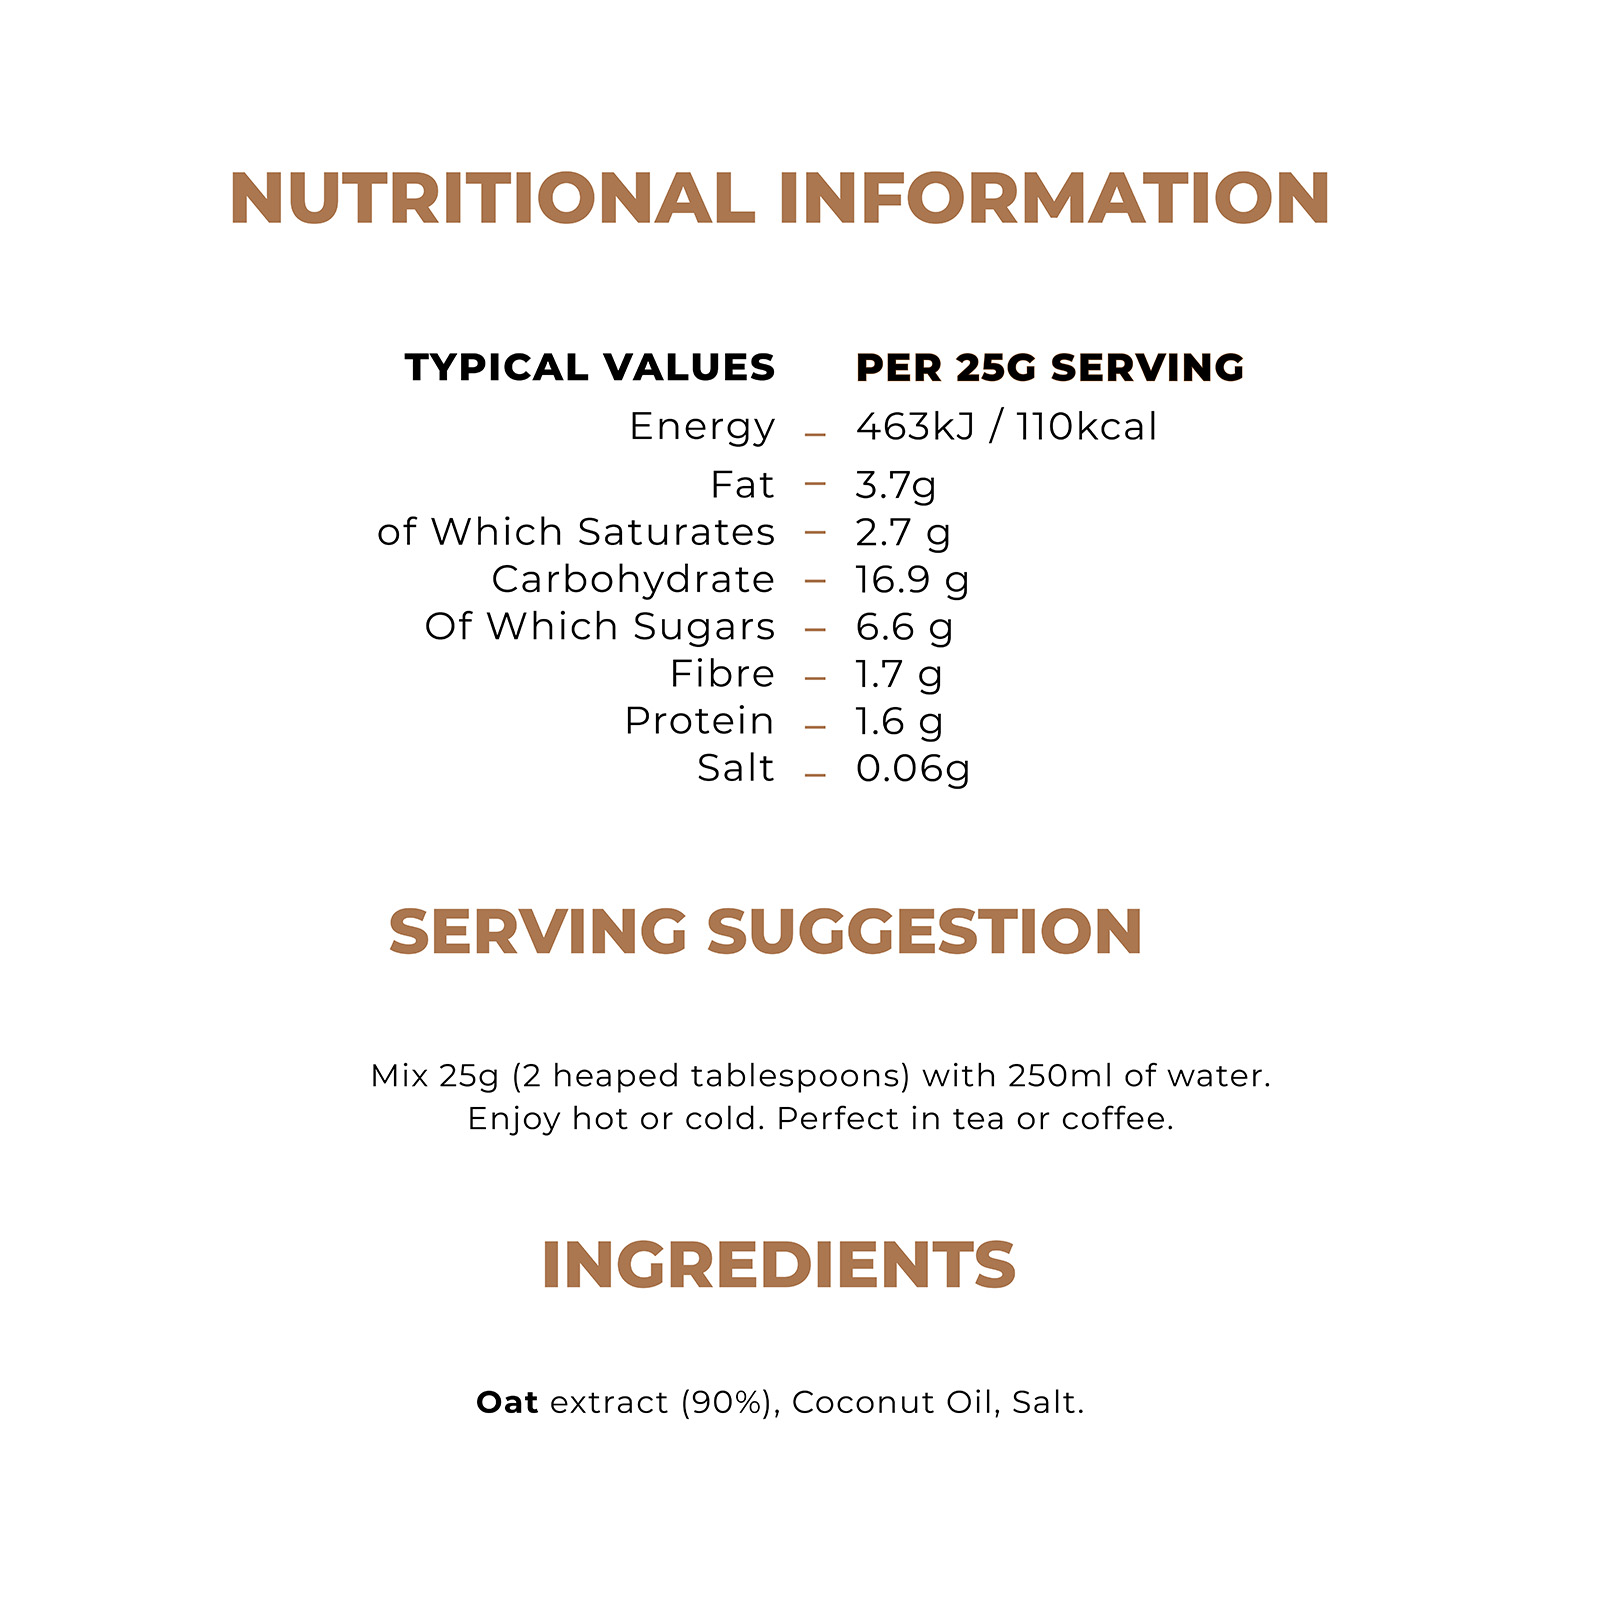 NUTRITIONAL INFORMATION TYPICAL VALUES PER 25G SERVING SERVING SUGGESTION Mix 25g (2 heaped tablespoons) with 250ml of water. Enjoy hot or cold. Perfect in tea or coffee. Ingredients Oat extract (90%), Coconut Oil, Salt.